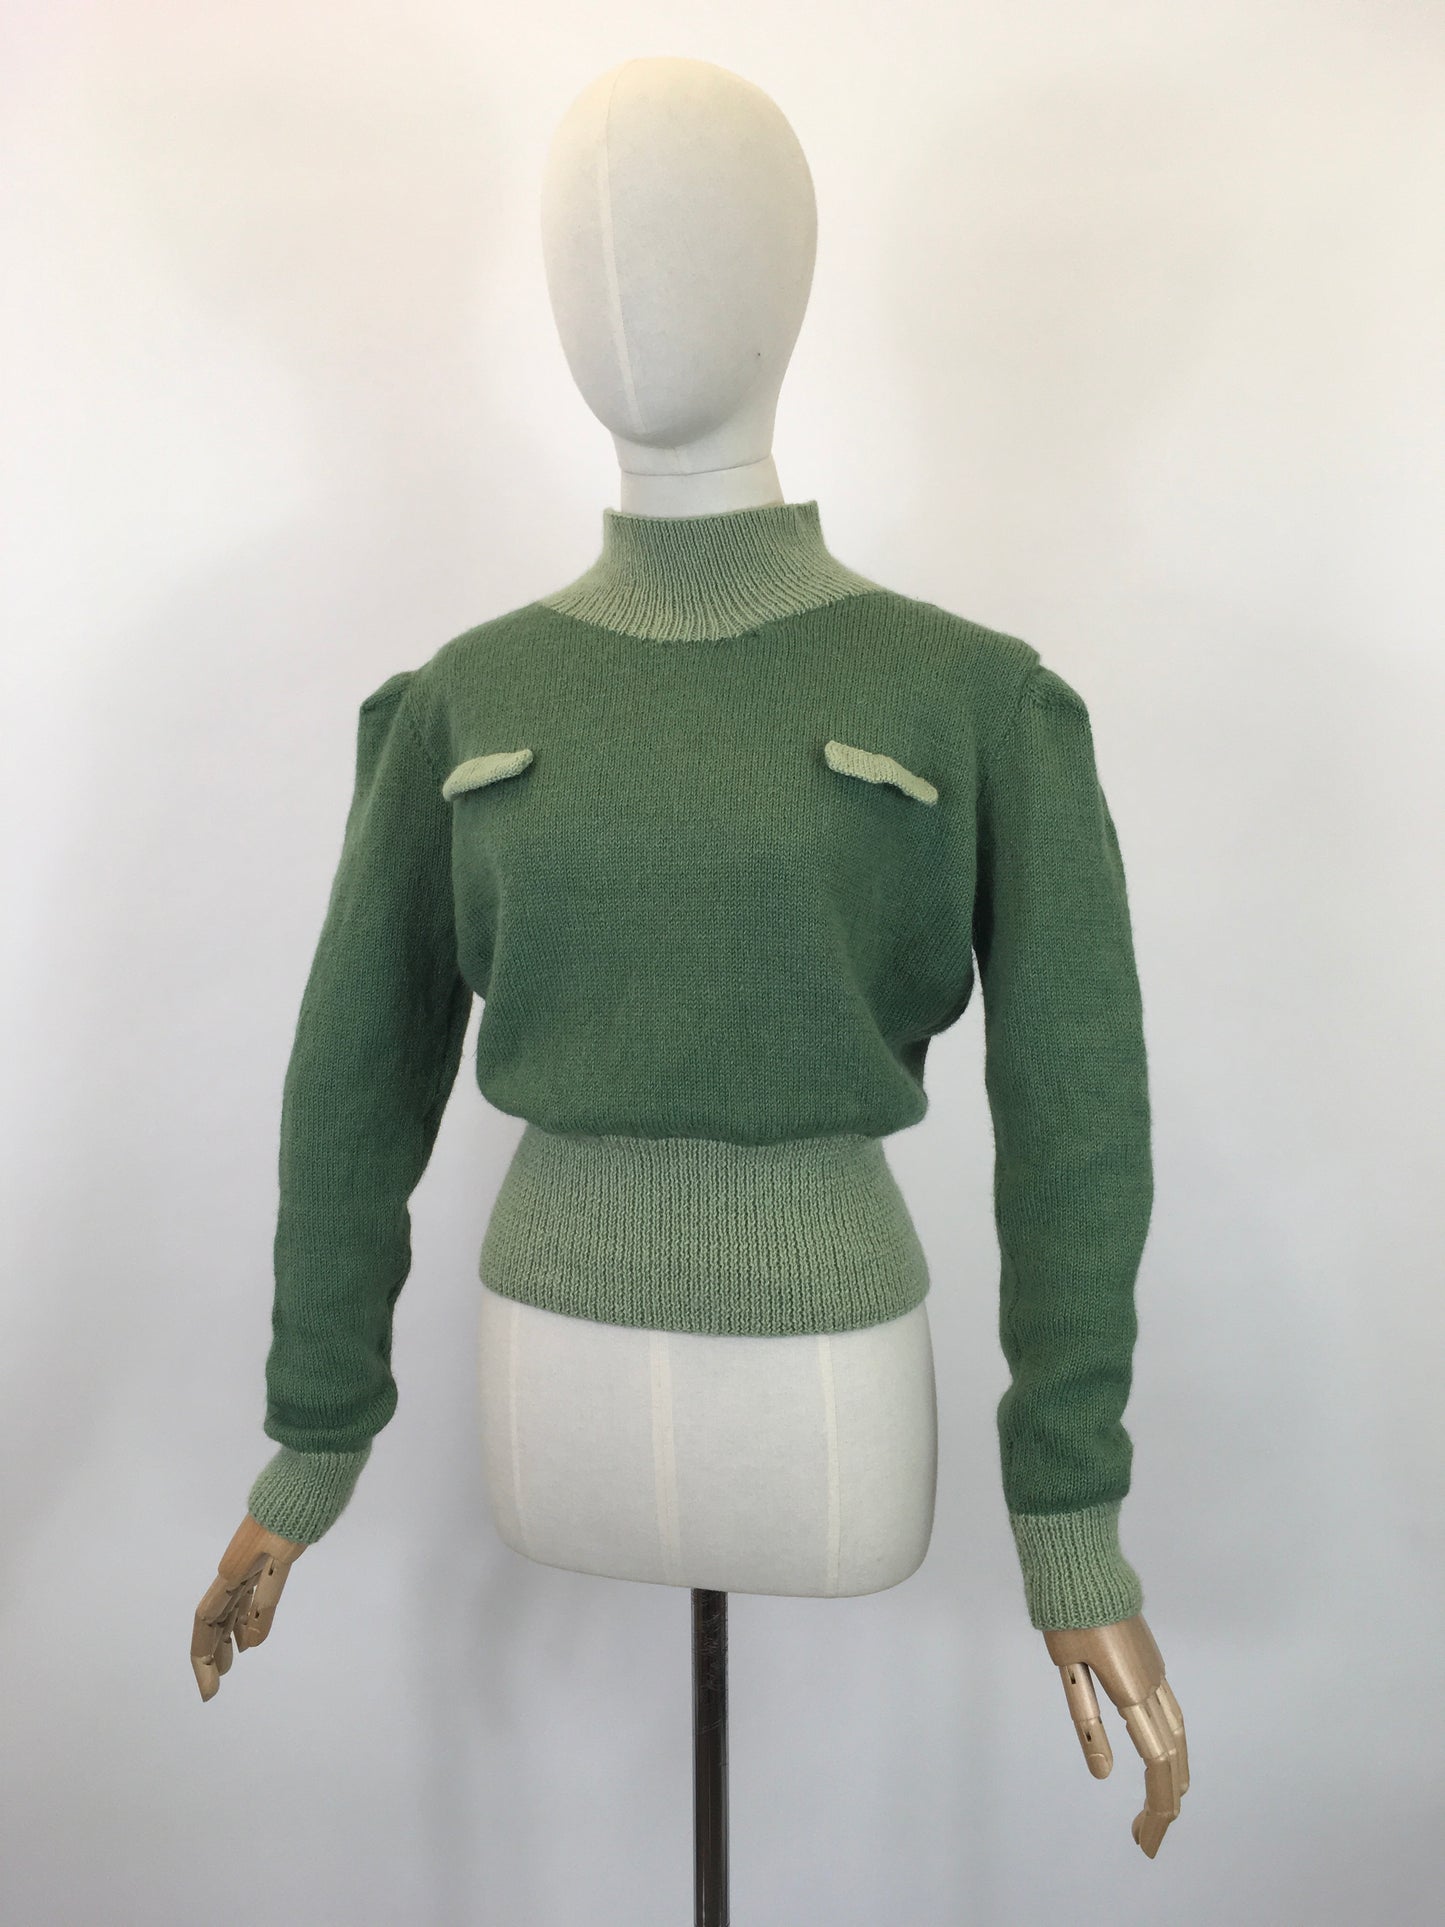 Recently Handknitted by ‘ Linda Boddison’ - Original 1940’s Reproduction Knitwear